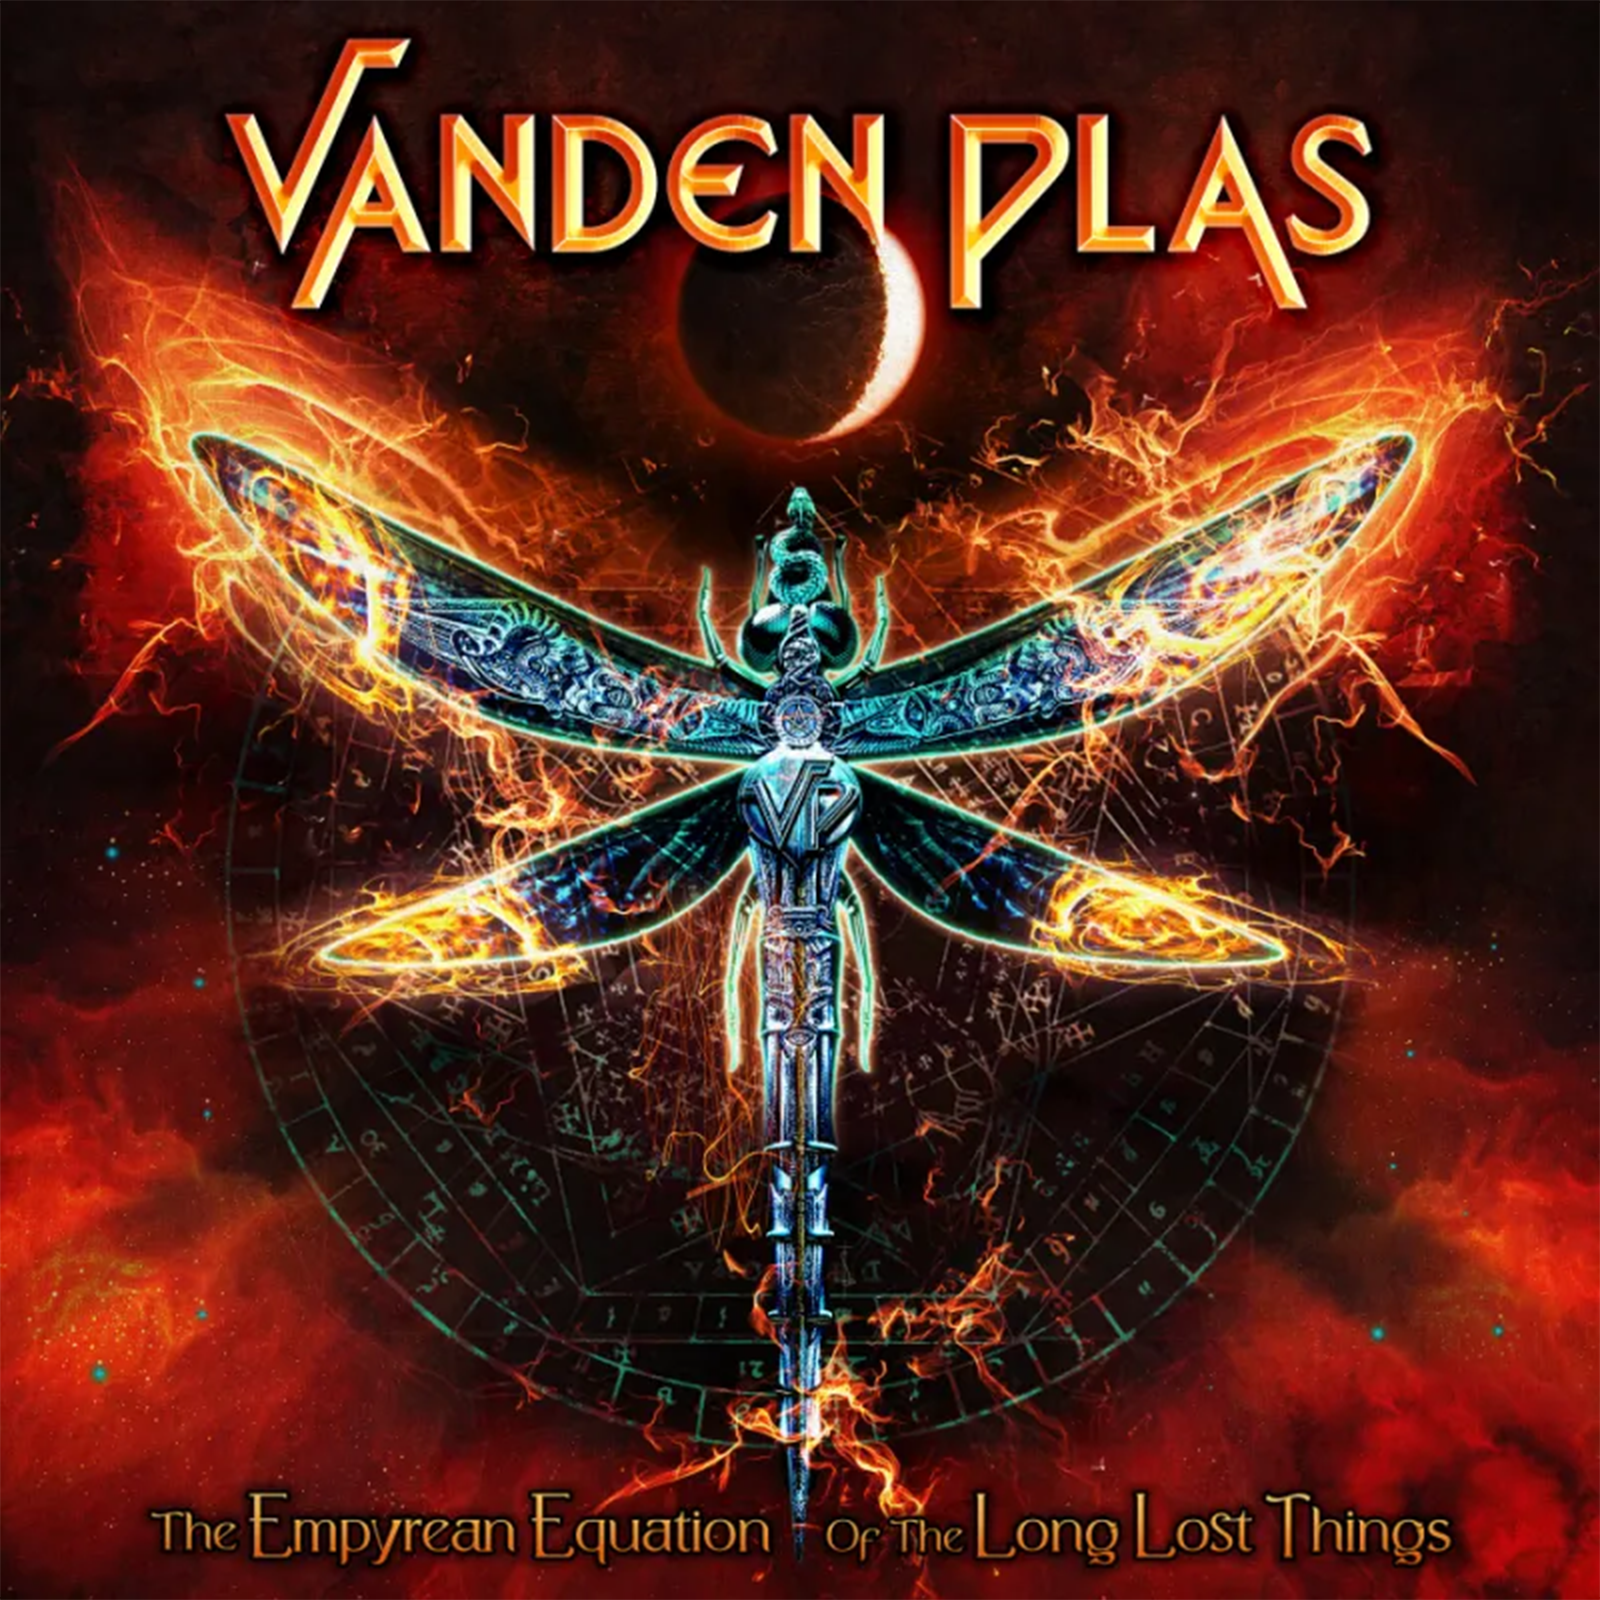 VANDEN PLAS The Empyrean Equation Of The Long Lost Things